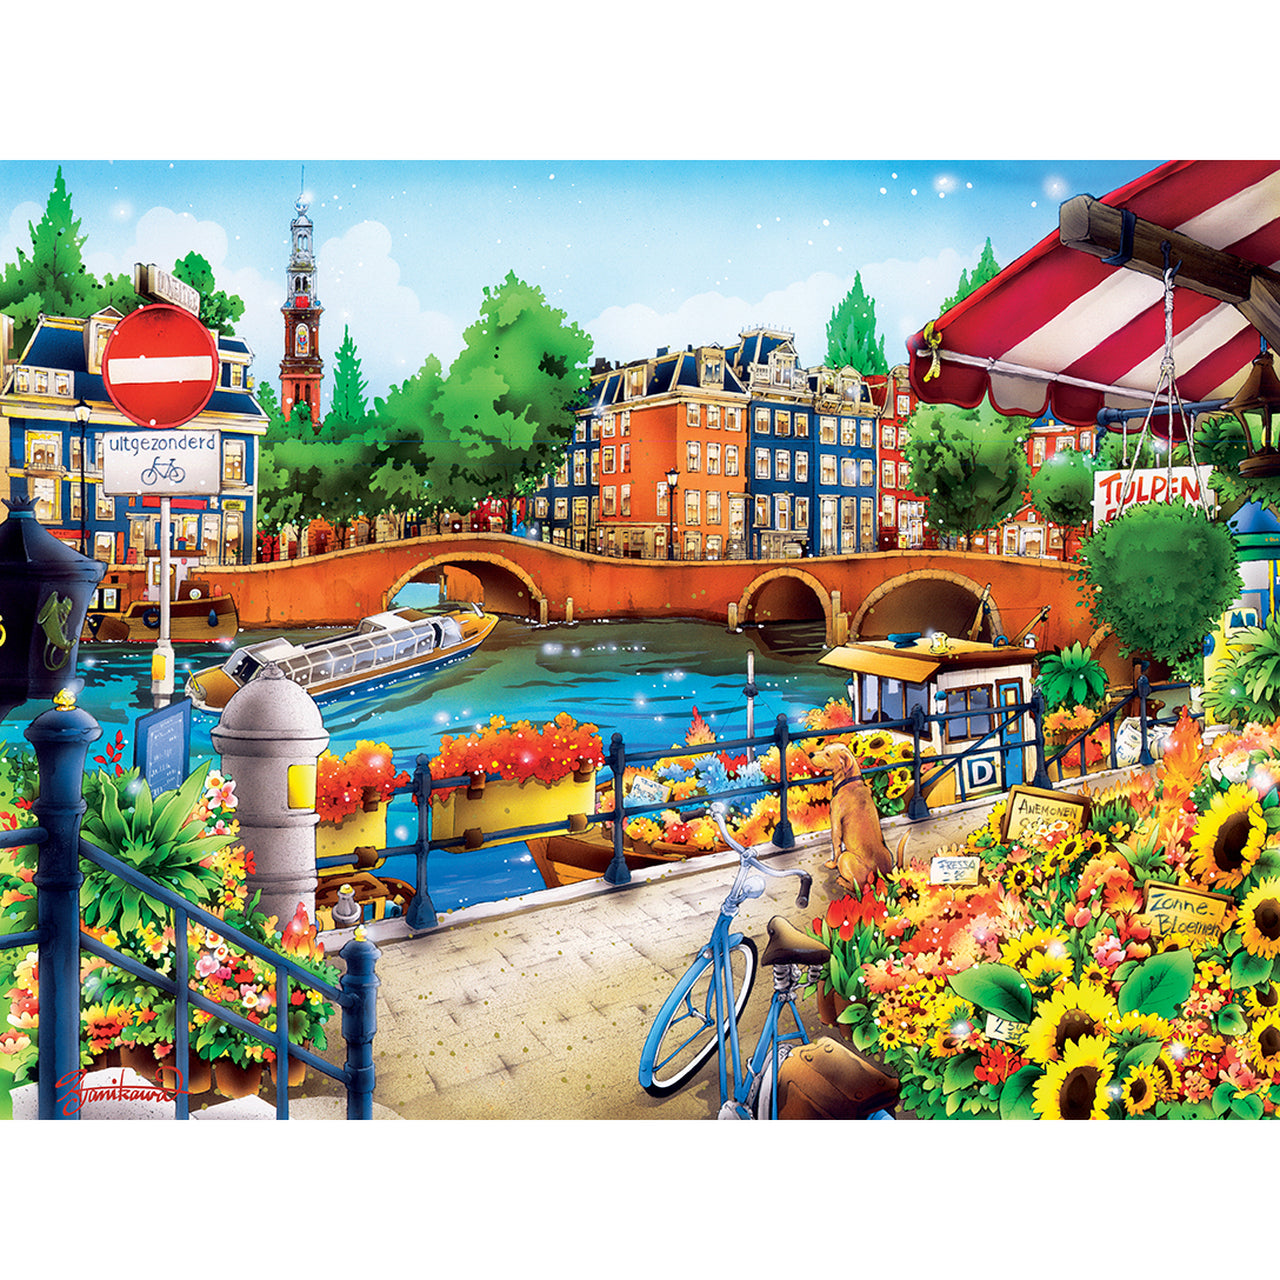 Travel Diary Amsterdam - 550 Piece Jigsaw Puzzle by Masterpieces